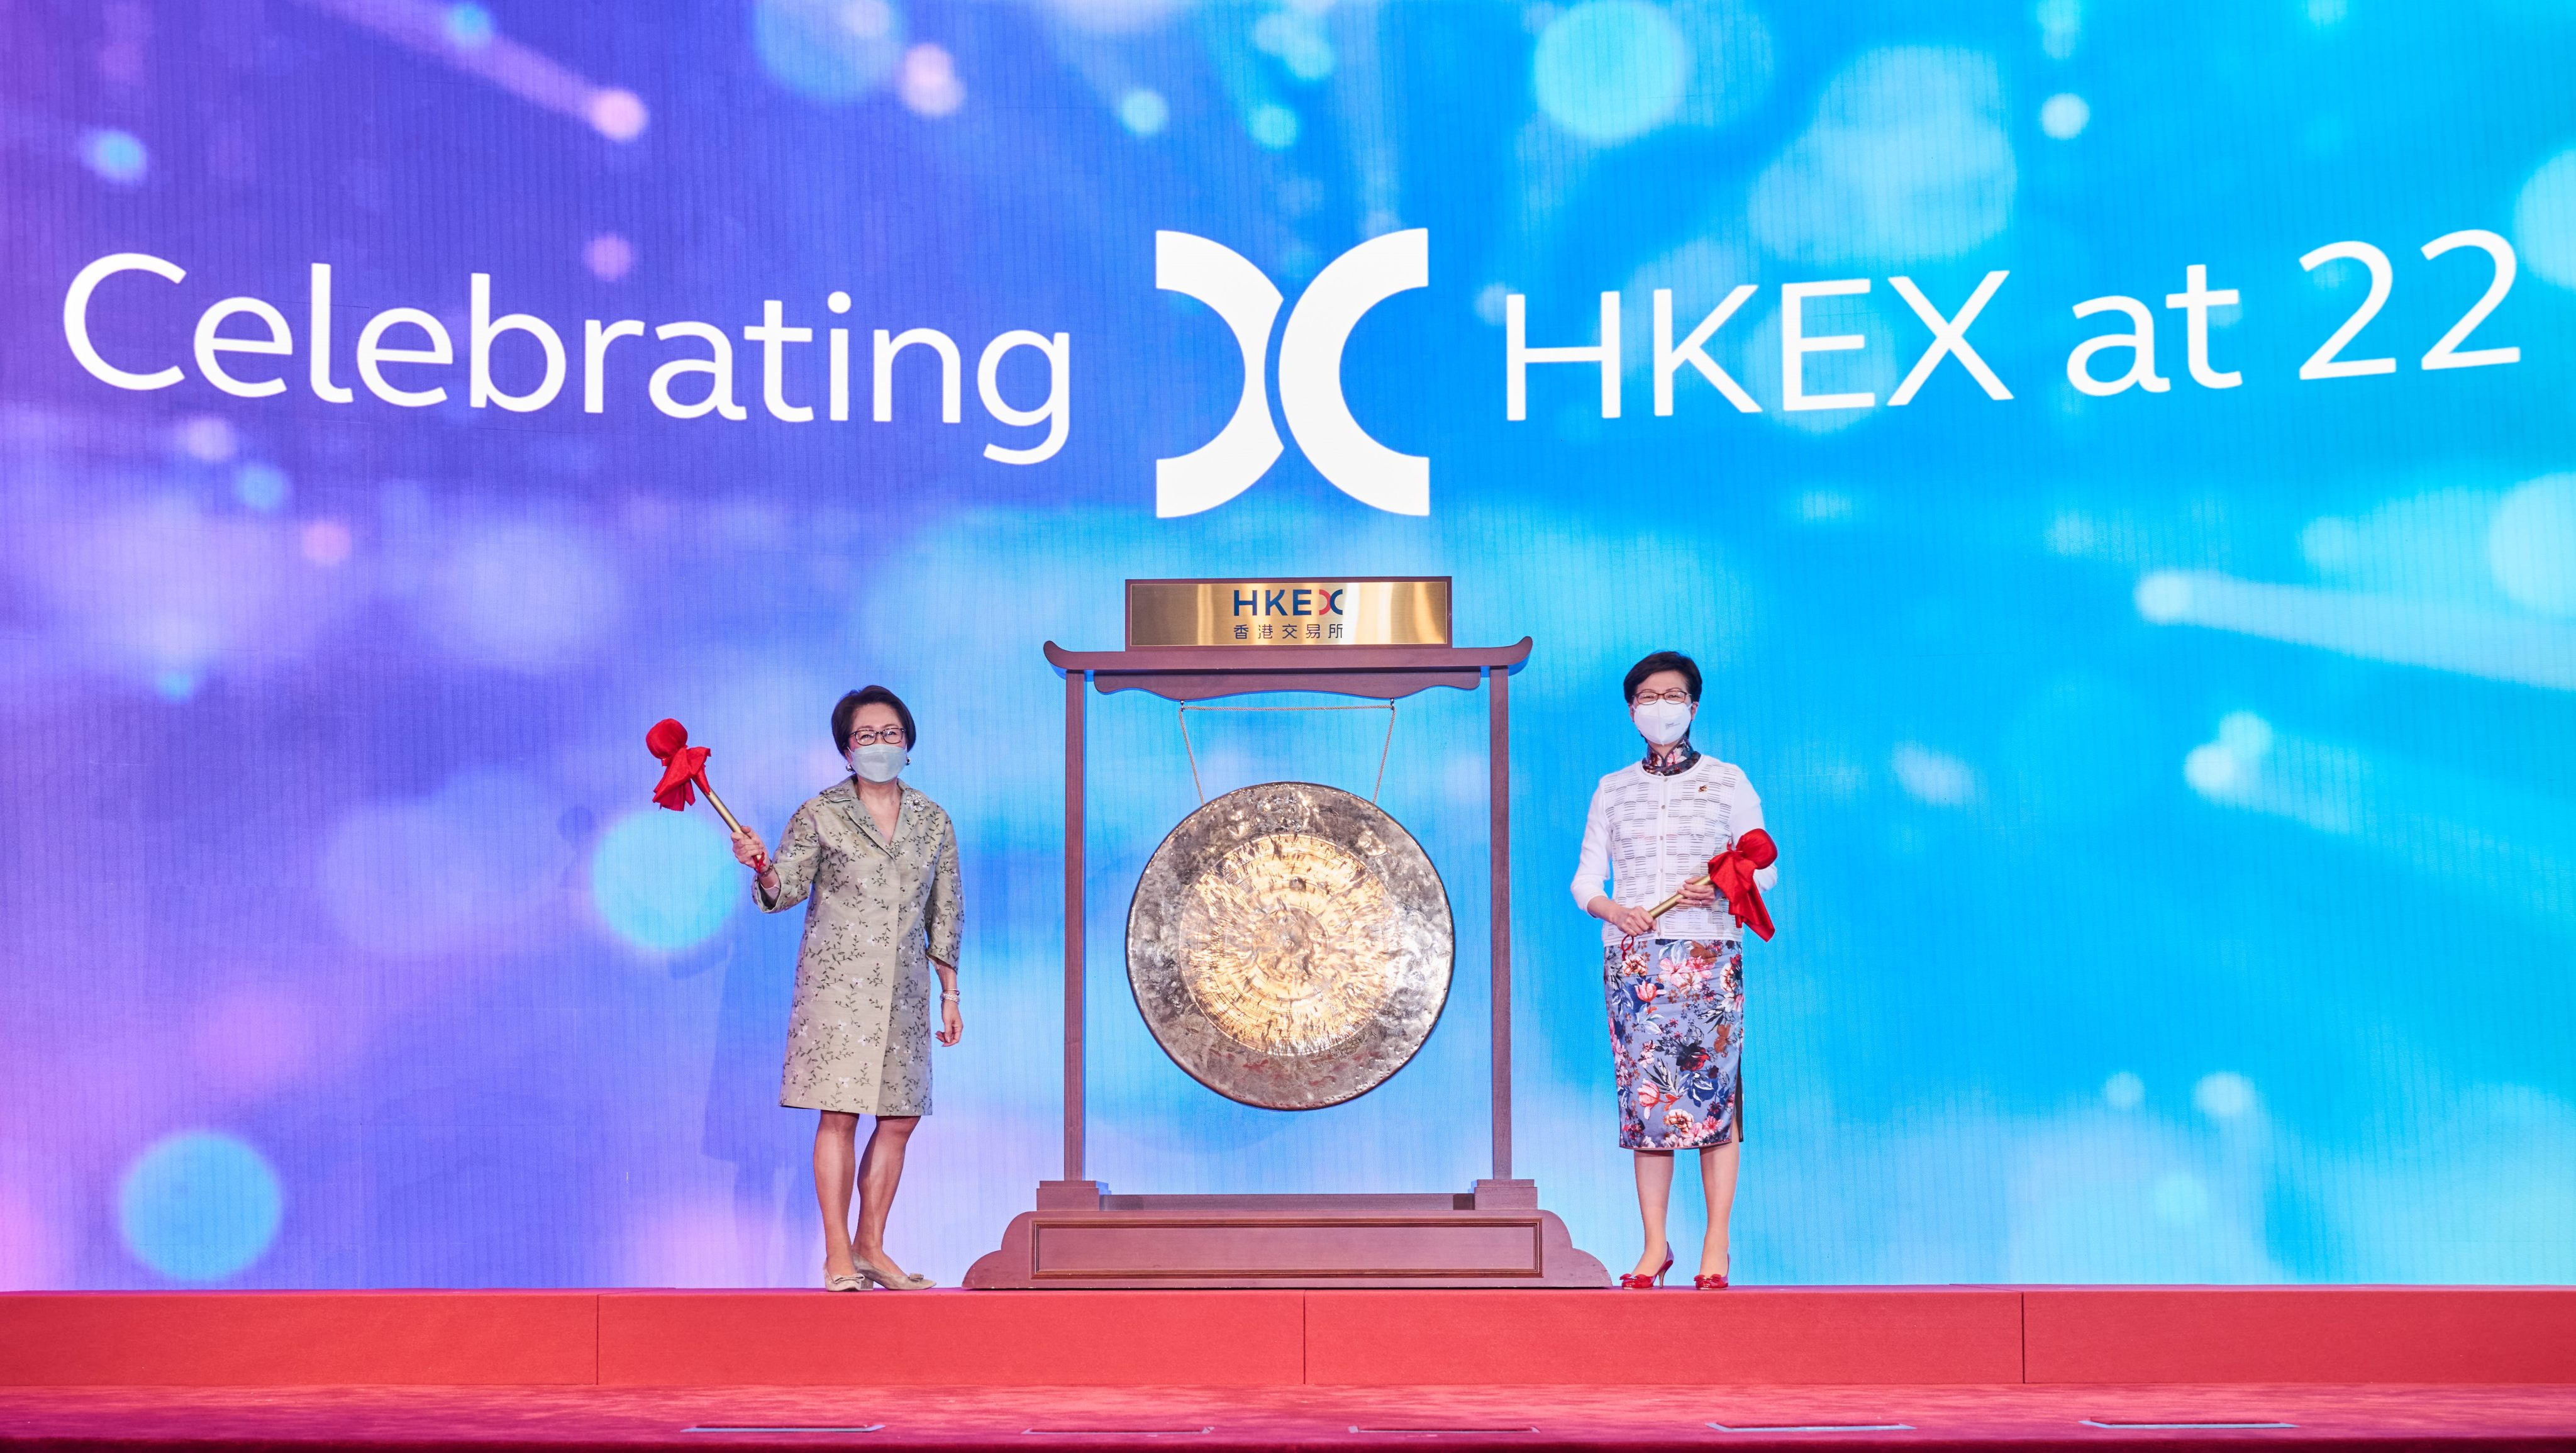 Hong Kong Exchanges and Clearing chairwoman Laura Cha Shih May-lung (left) and then chief executive Carrie Lam Cheng Yuet-Ngor strike the gong to mark HKEX’s 22nd anniversary as a listed company on June 21. Photo: HKEX